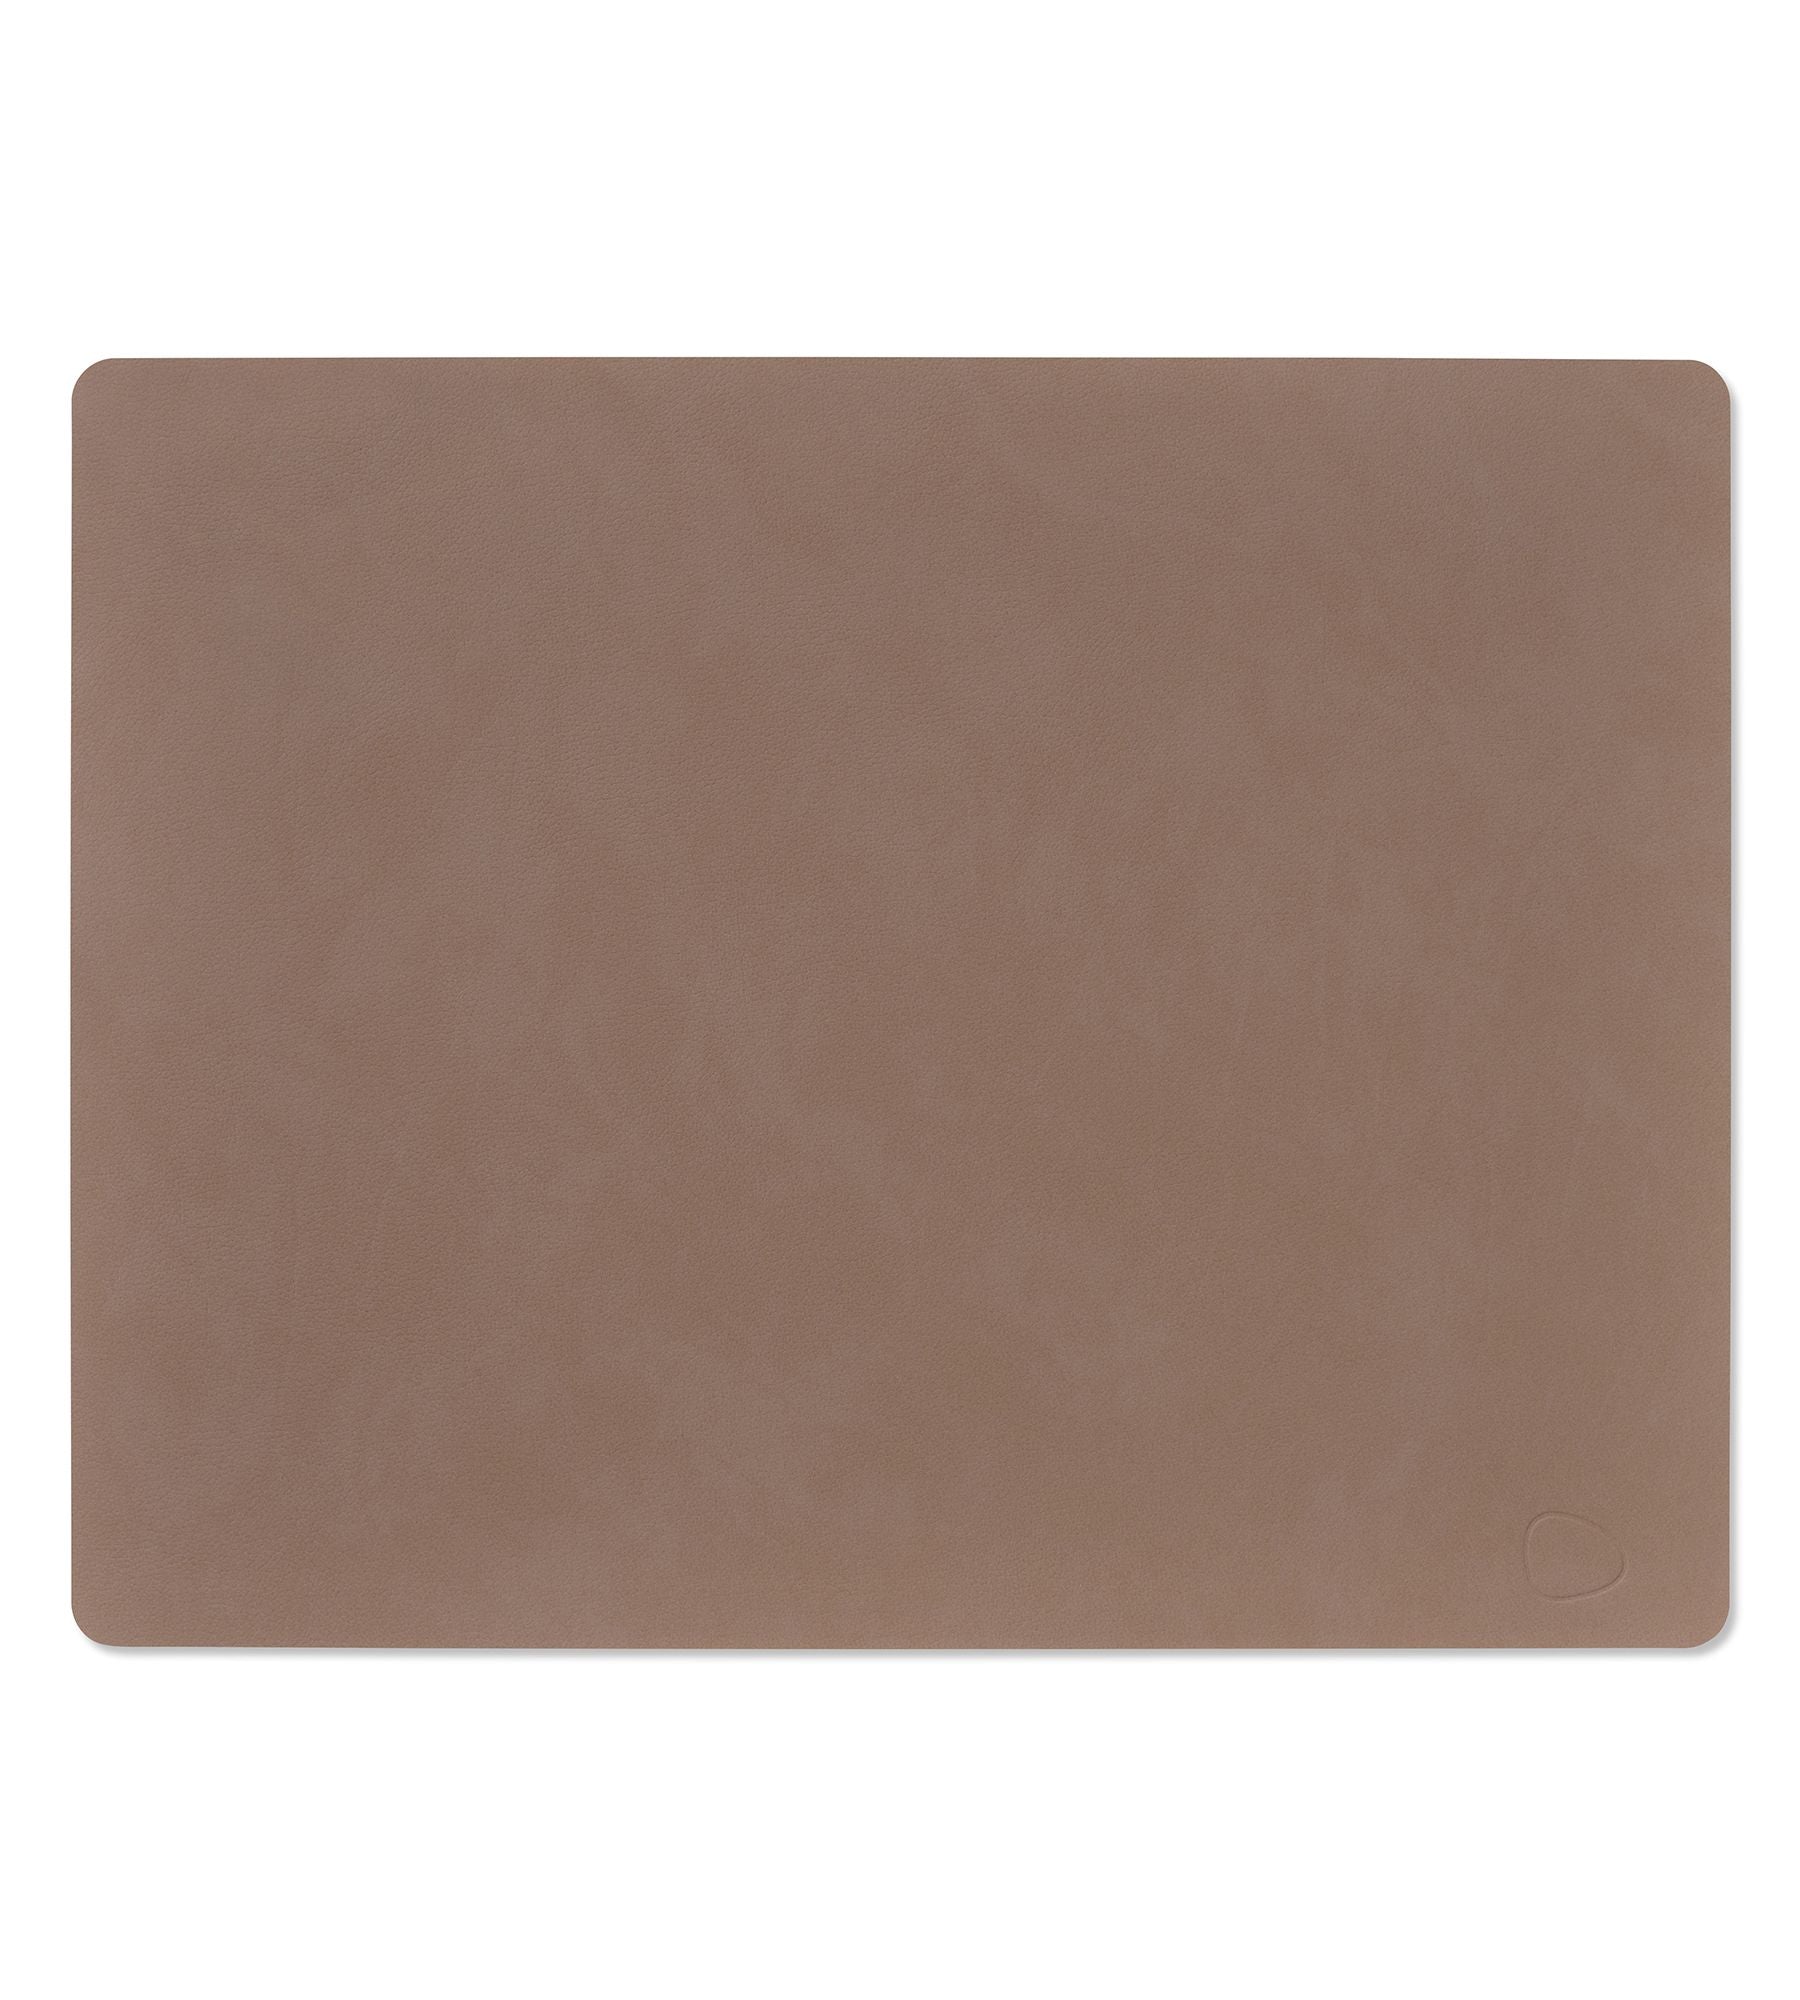 Lind Dna Table Mat Square Large, Truffle